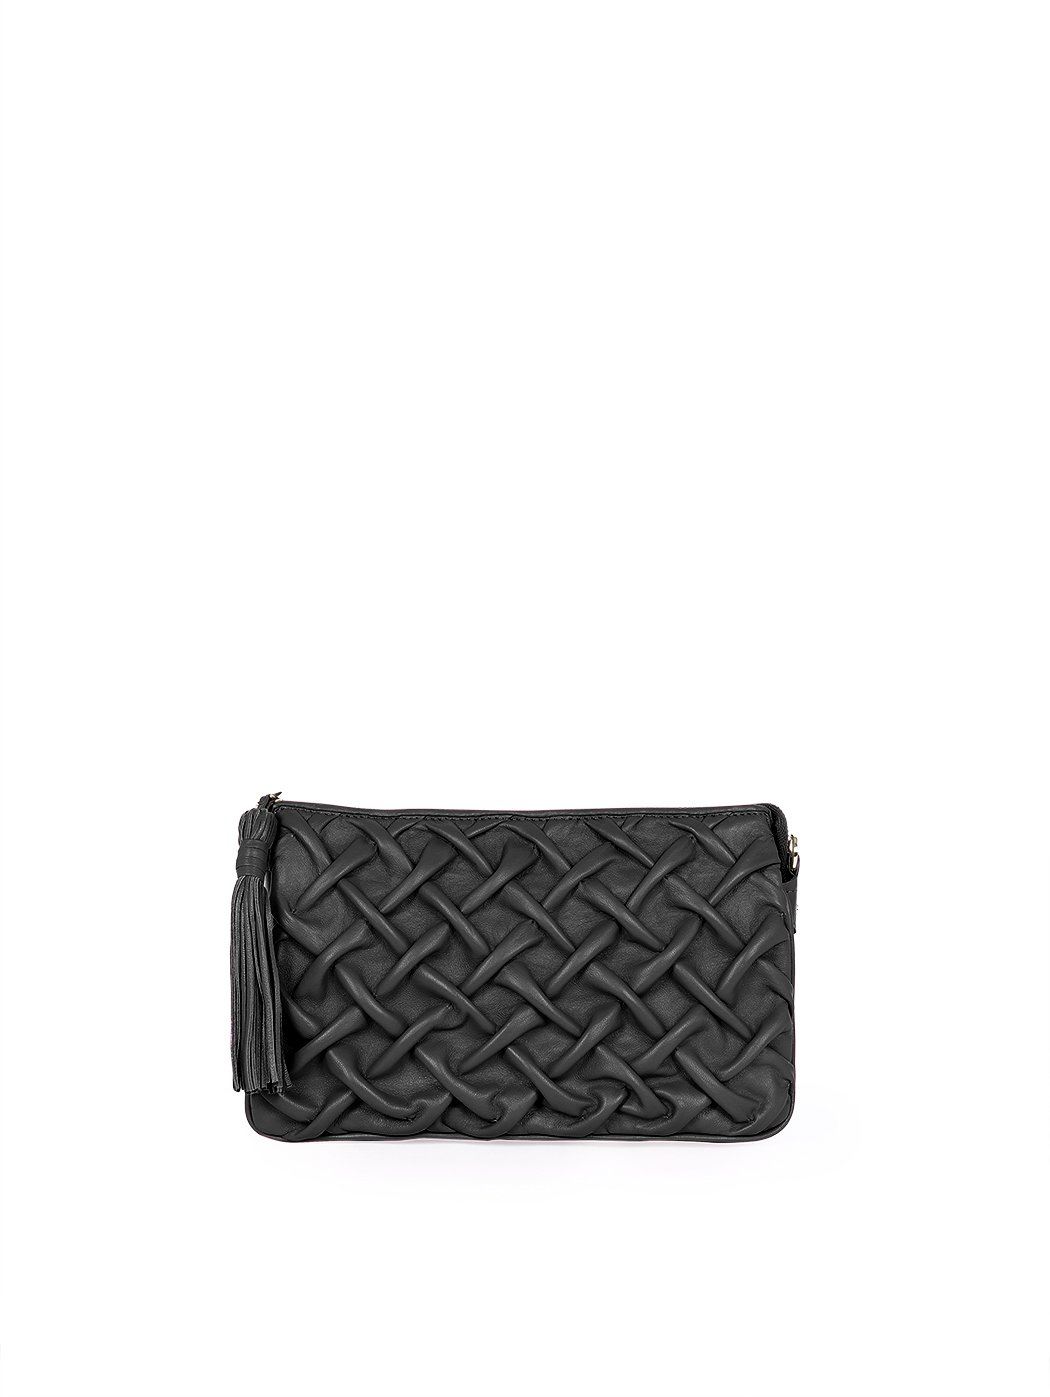 Quilted Puffer Weave Leather Accordion Crossbody Bag Black